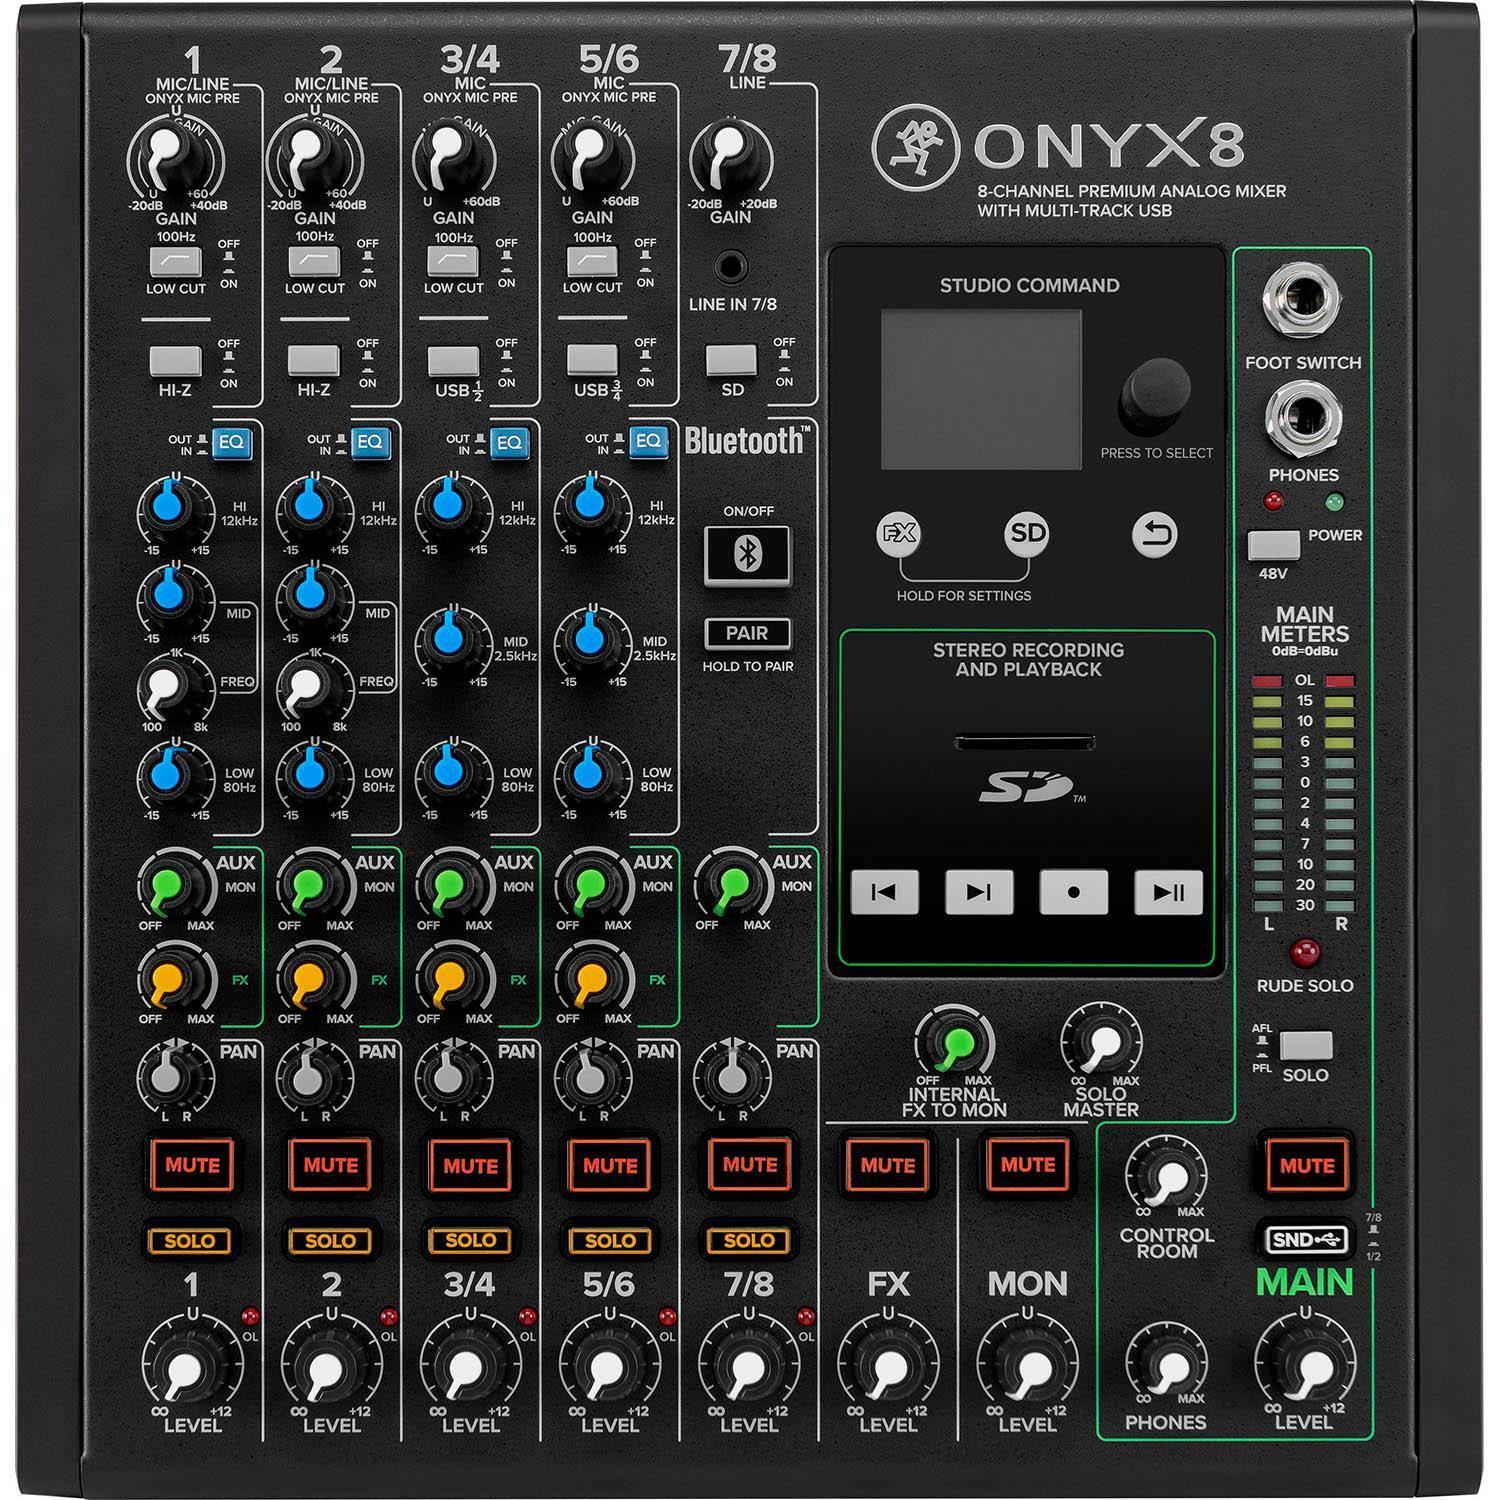 Mackie Onyx8 8 Channel Mixer with Multi-Track USB - DY Pro Audio